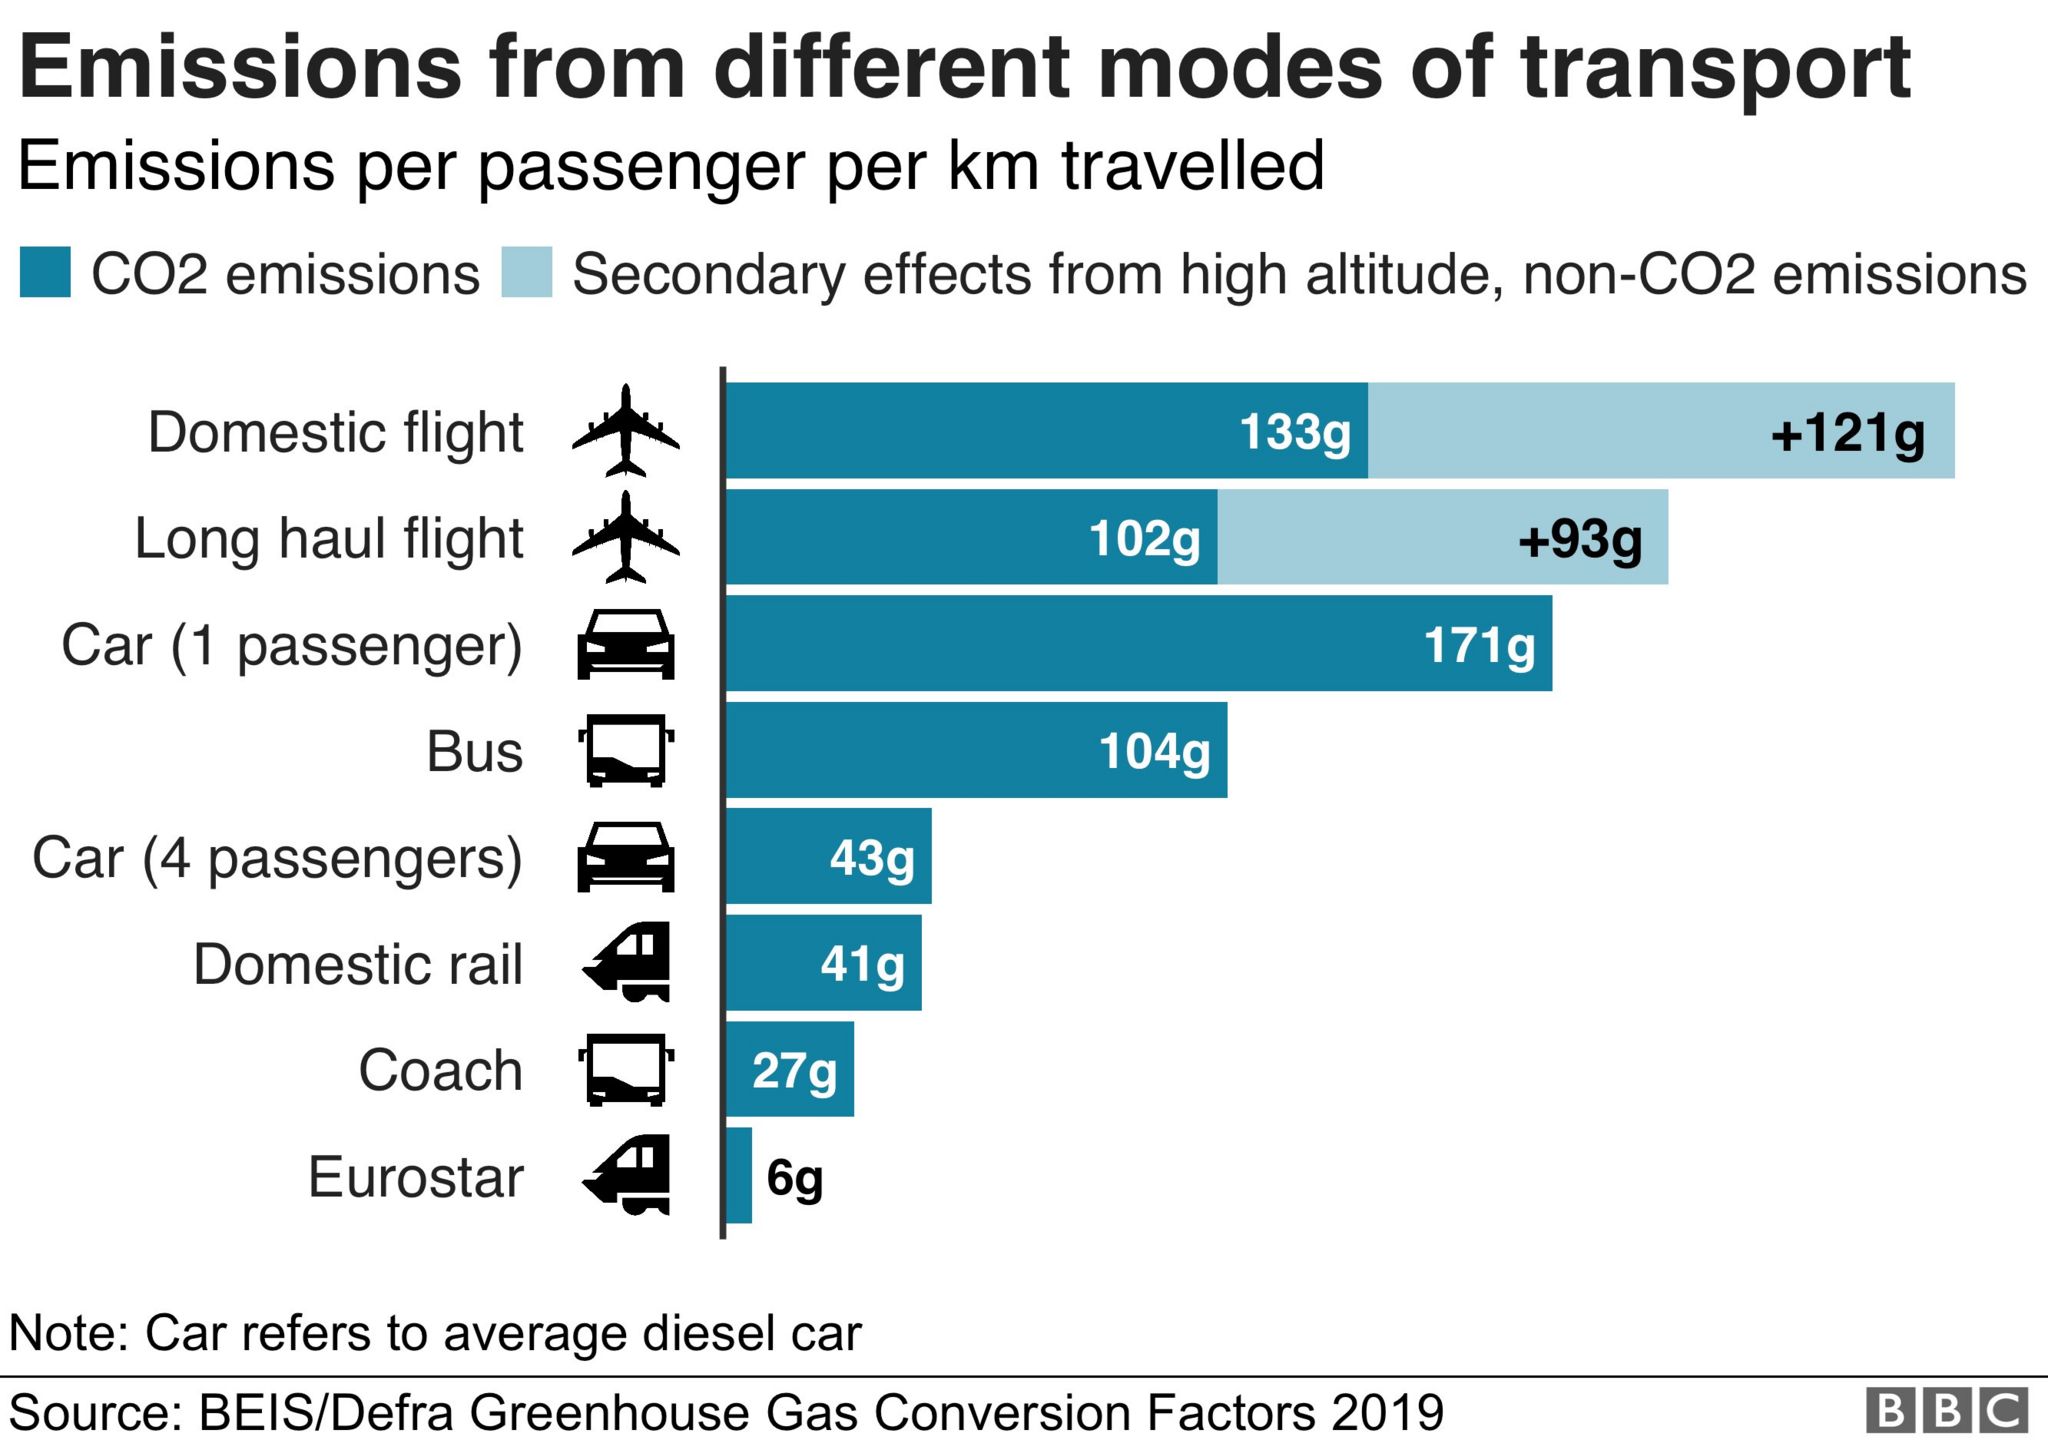 Bar chart showing the emissions of the different modes of transport